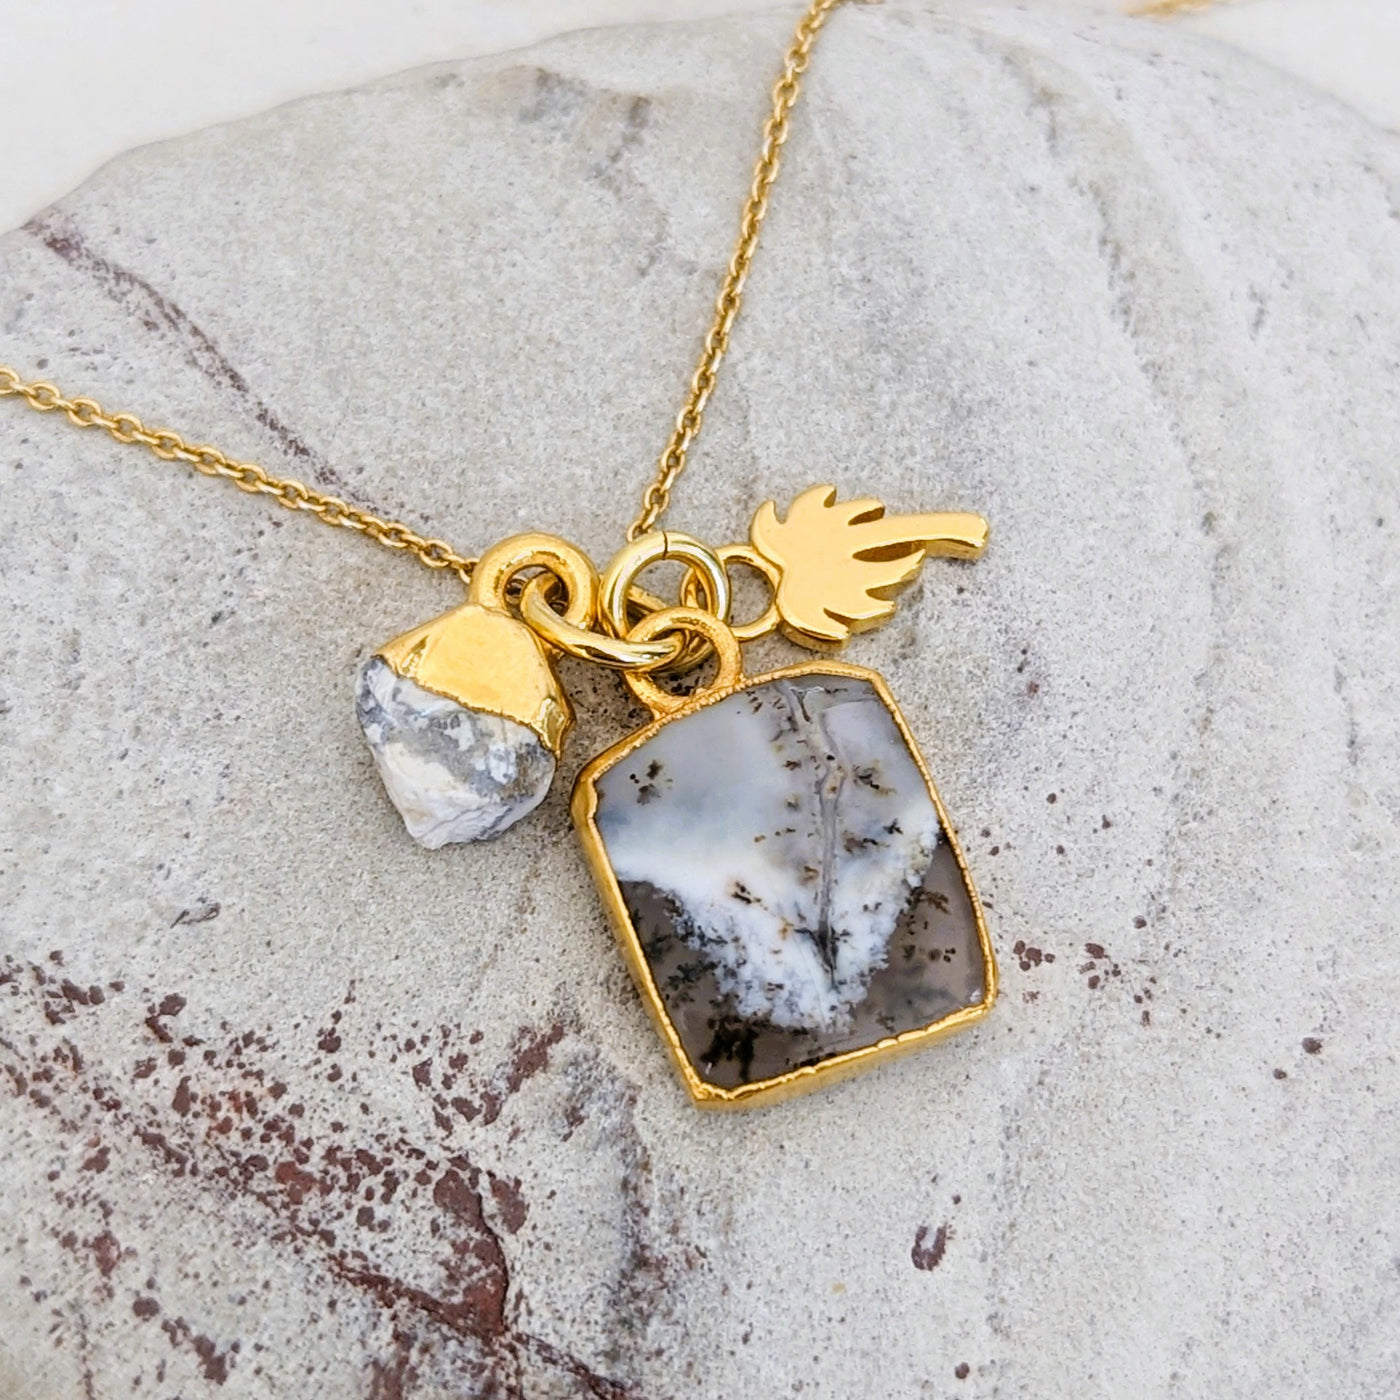 Gold plated dendritic agate, white howlite and palm tree charm pendant necklace